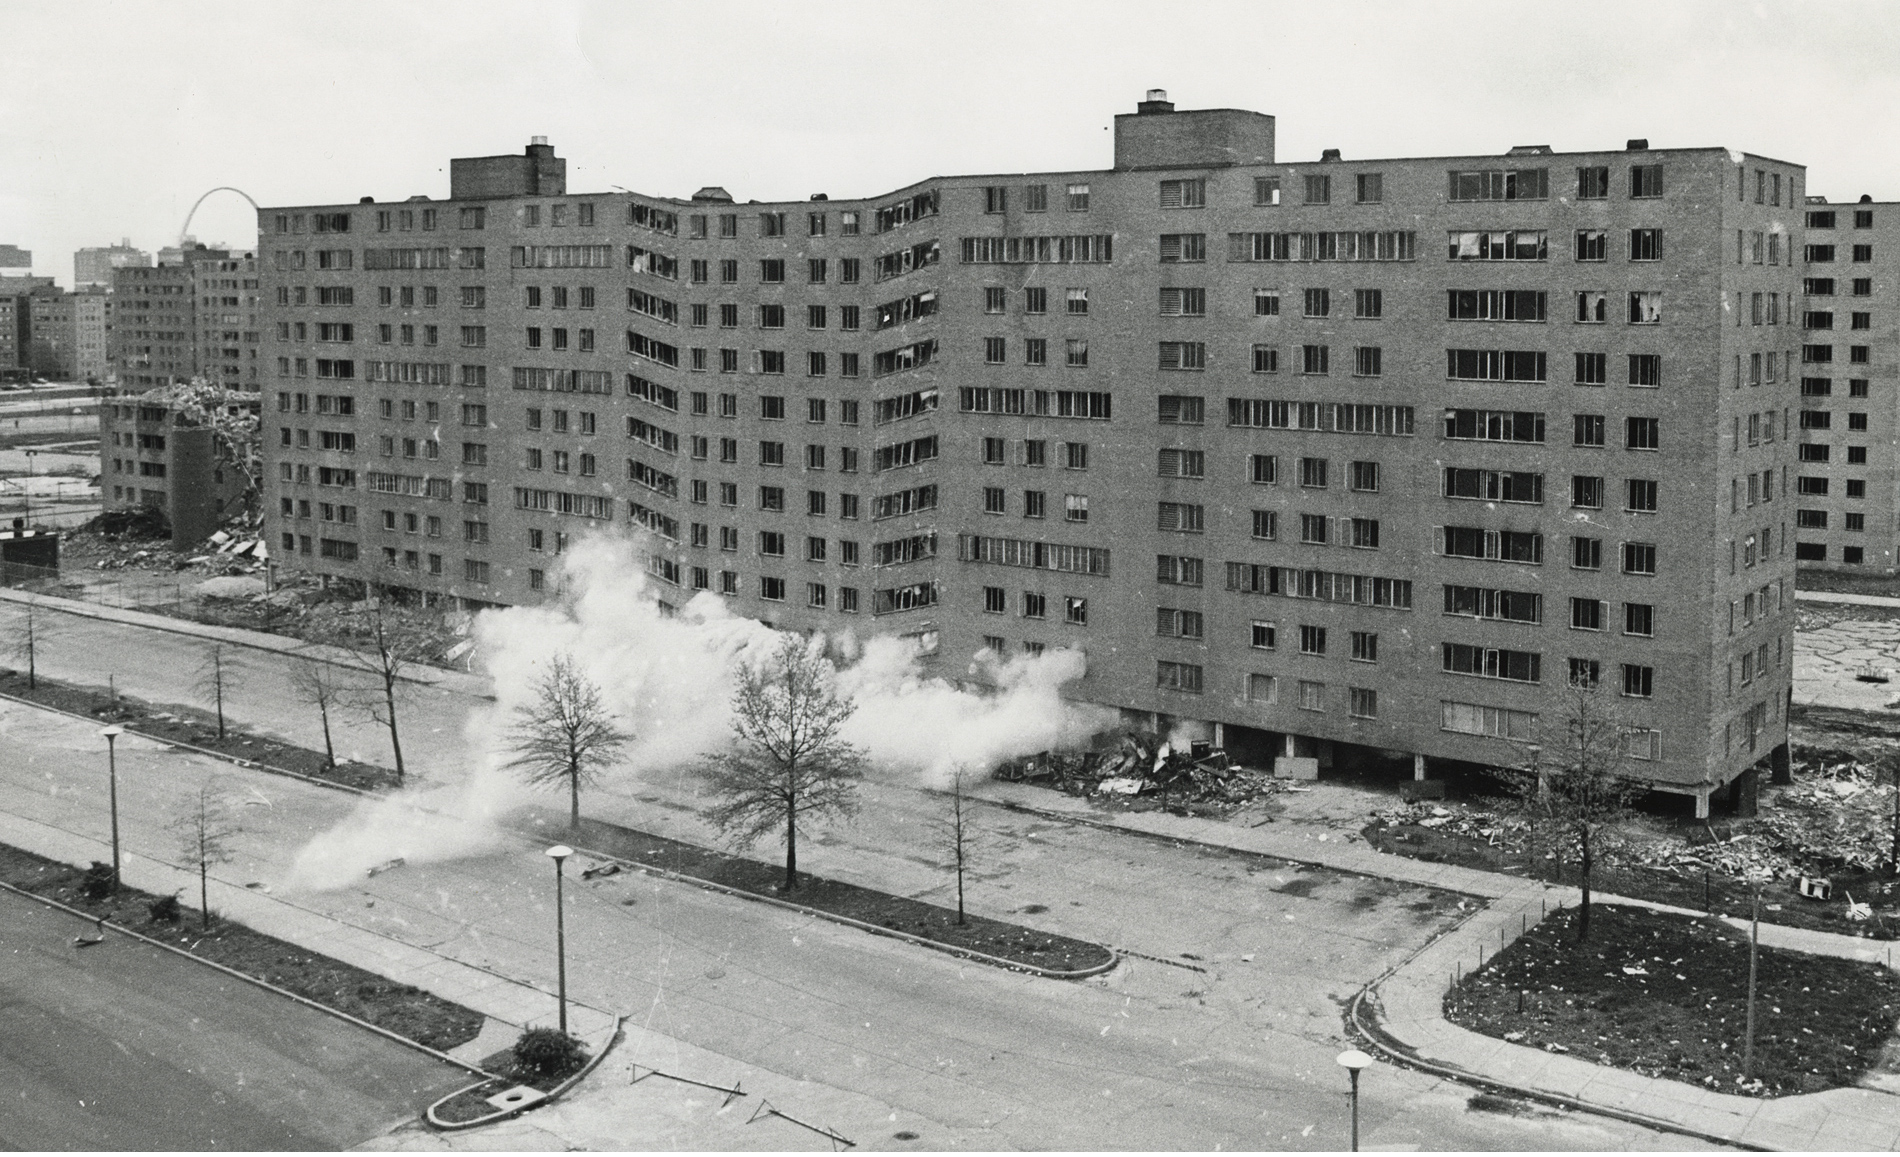 Was the failure of Pruitt-Igoe really all about the architecture?